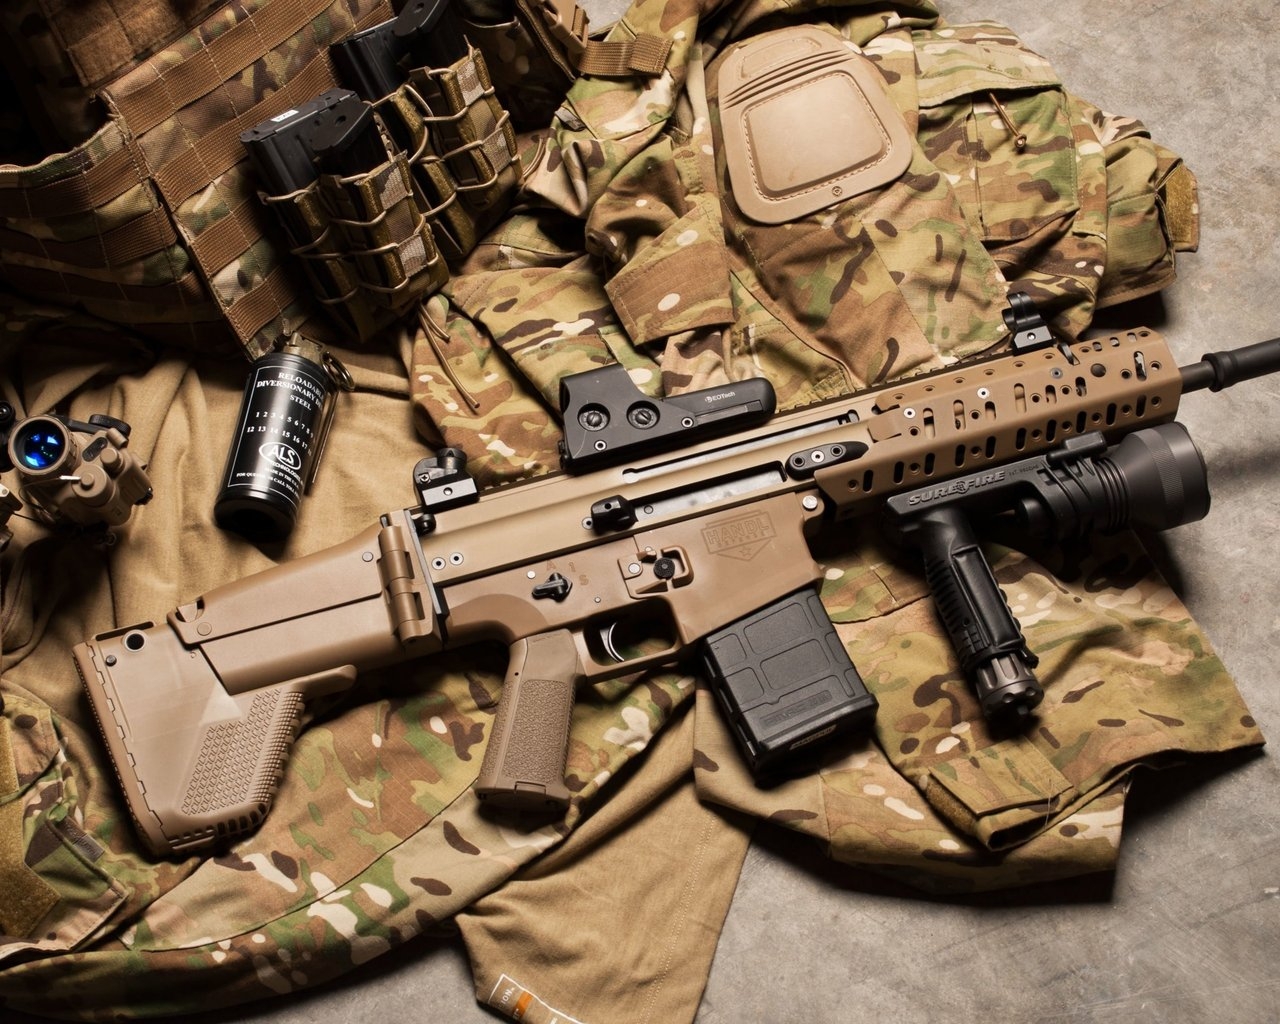 FN Scar Assault Rifle for 1280 x 1024 resolution